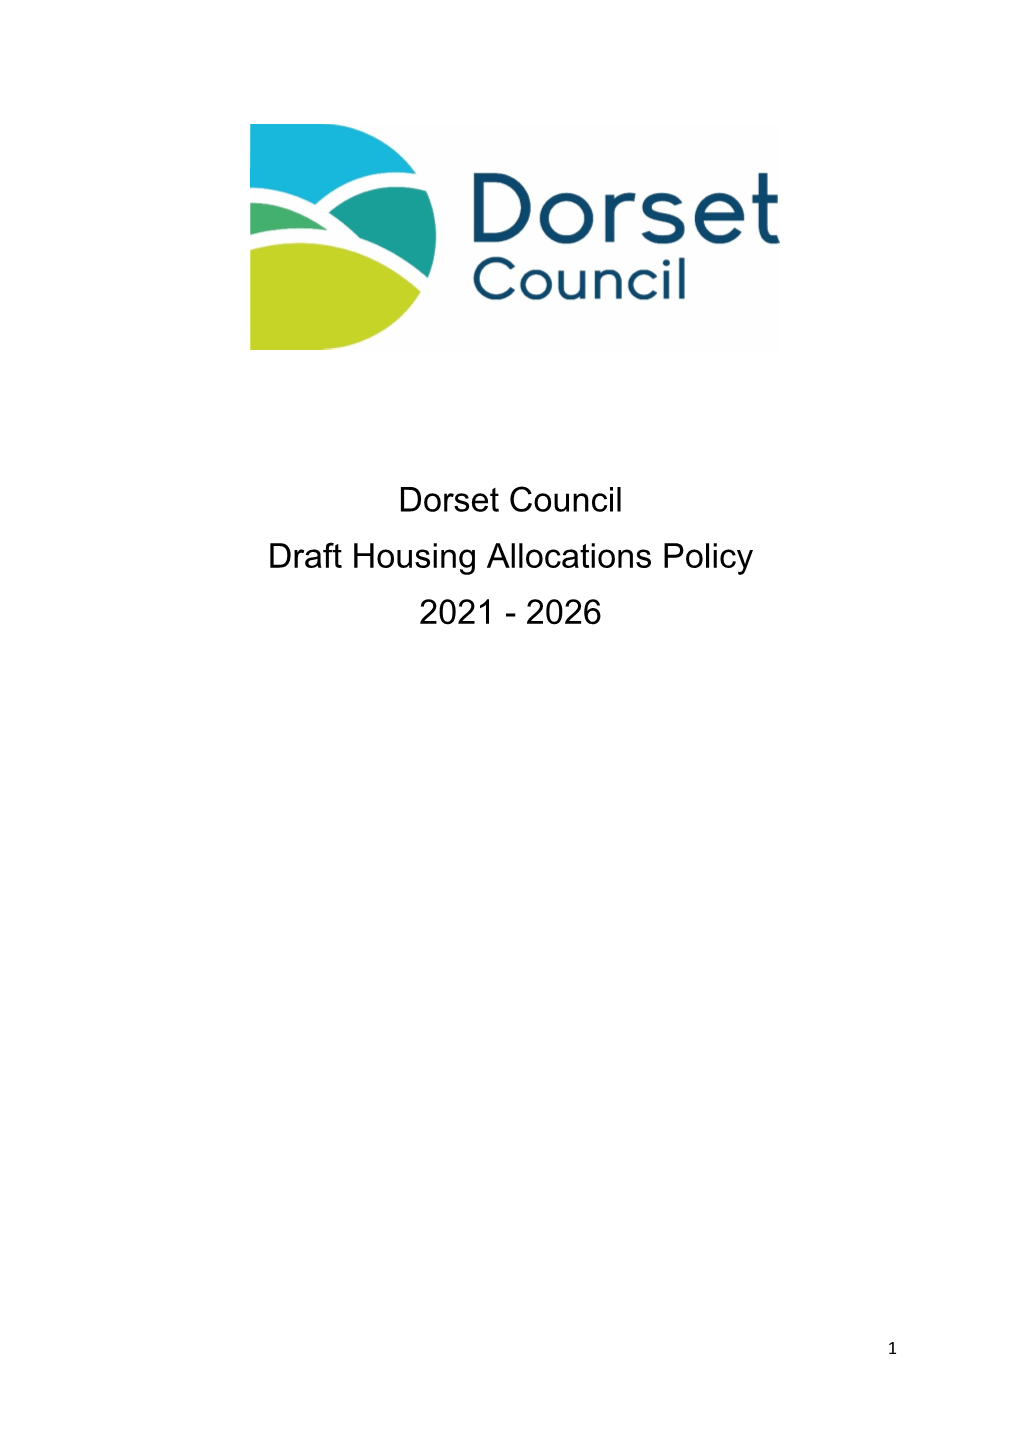 Dorset Council Draft Housing Allocations Policy 2021 - 2026